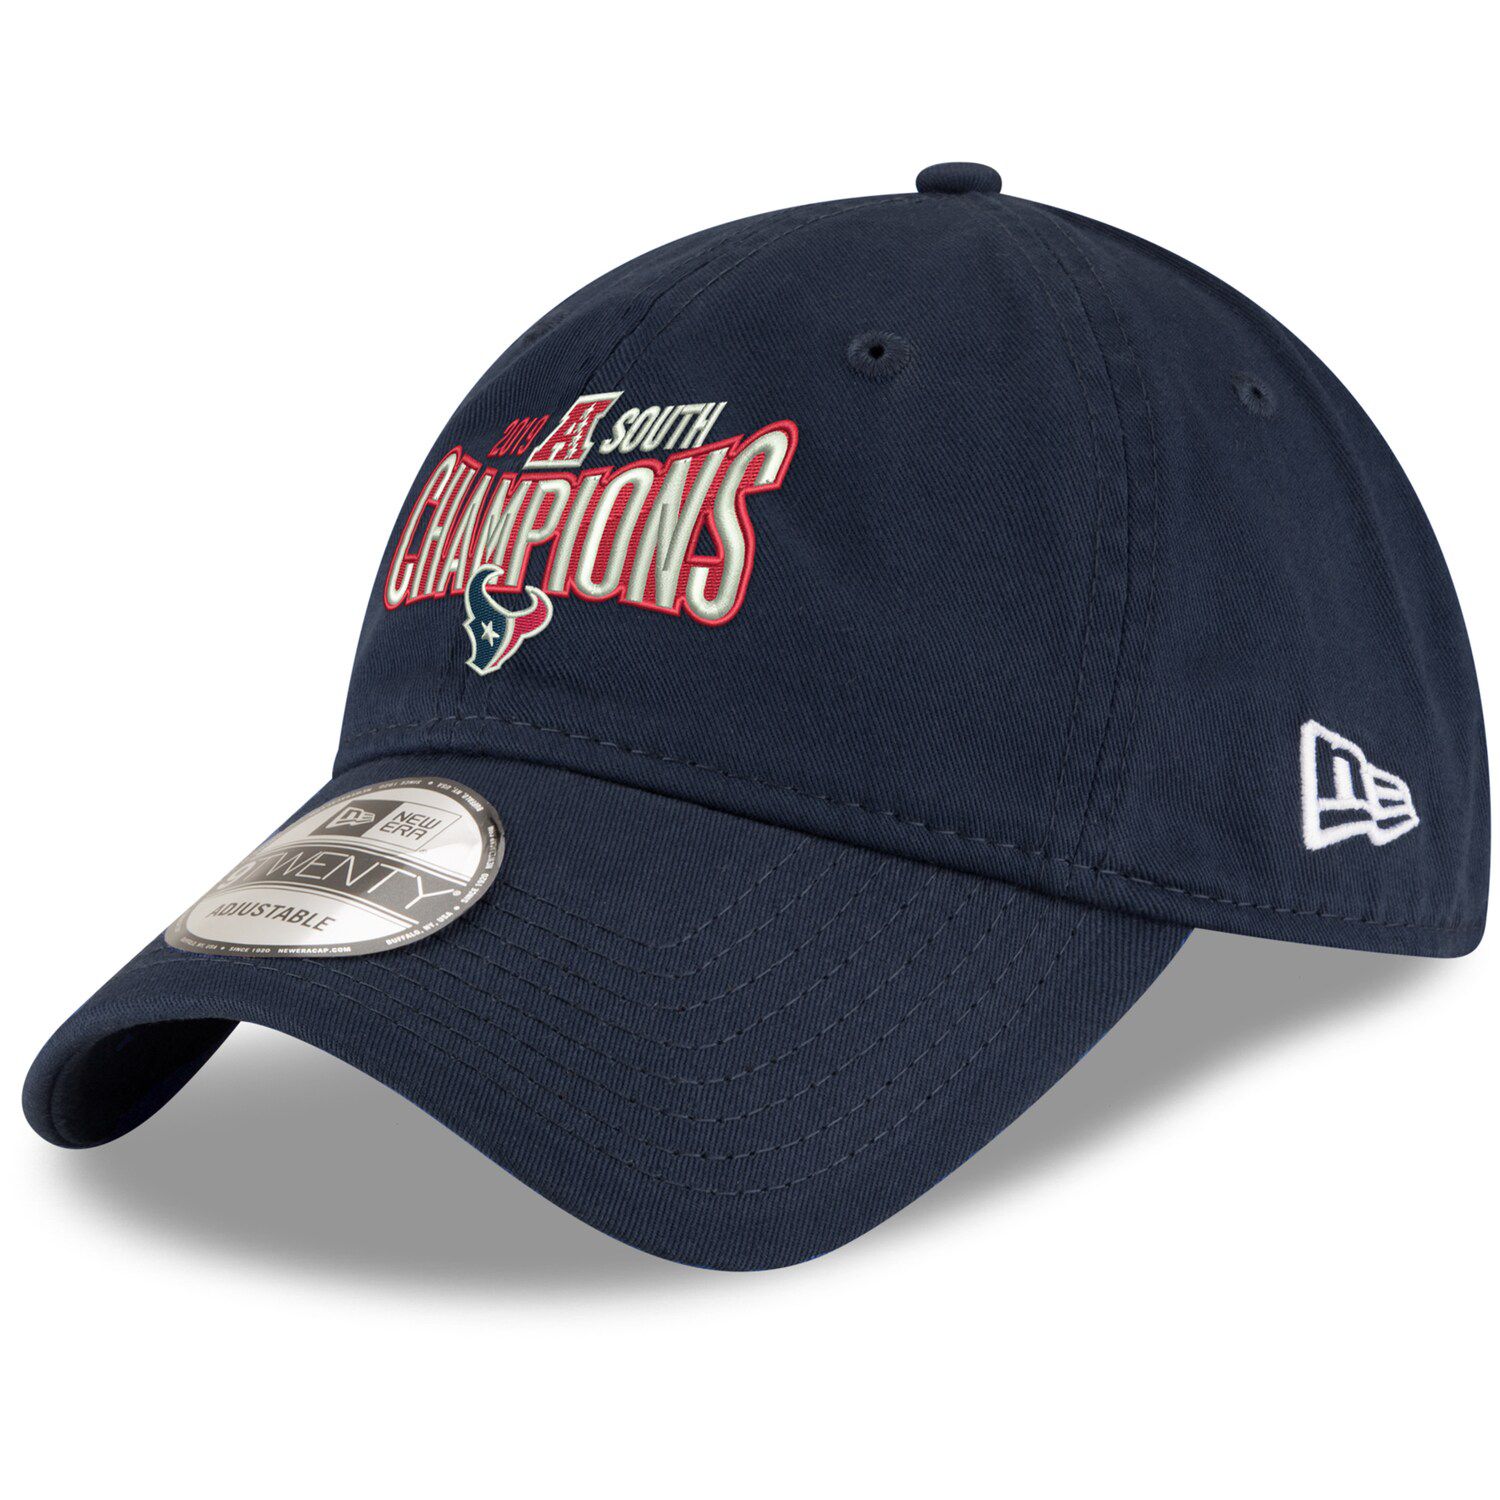 afc south champions hat